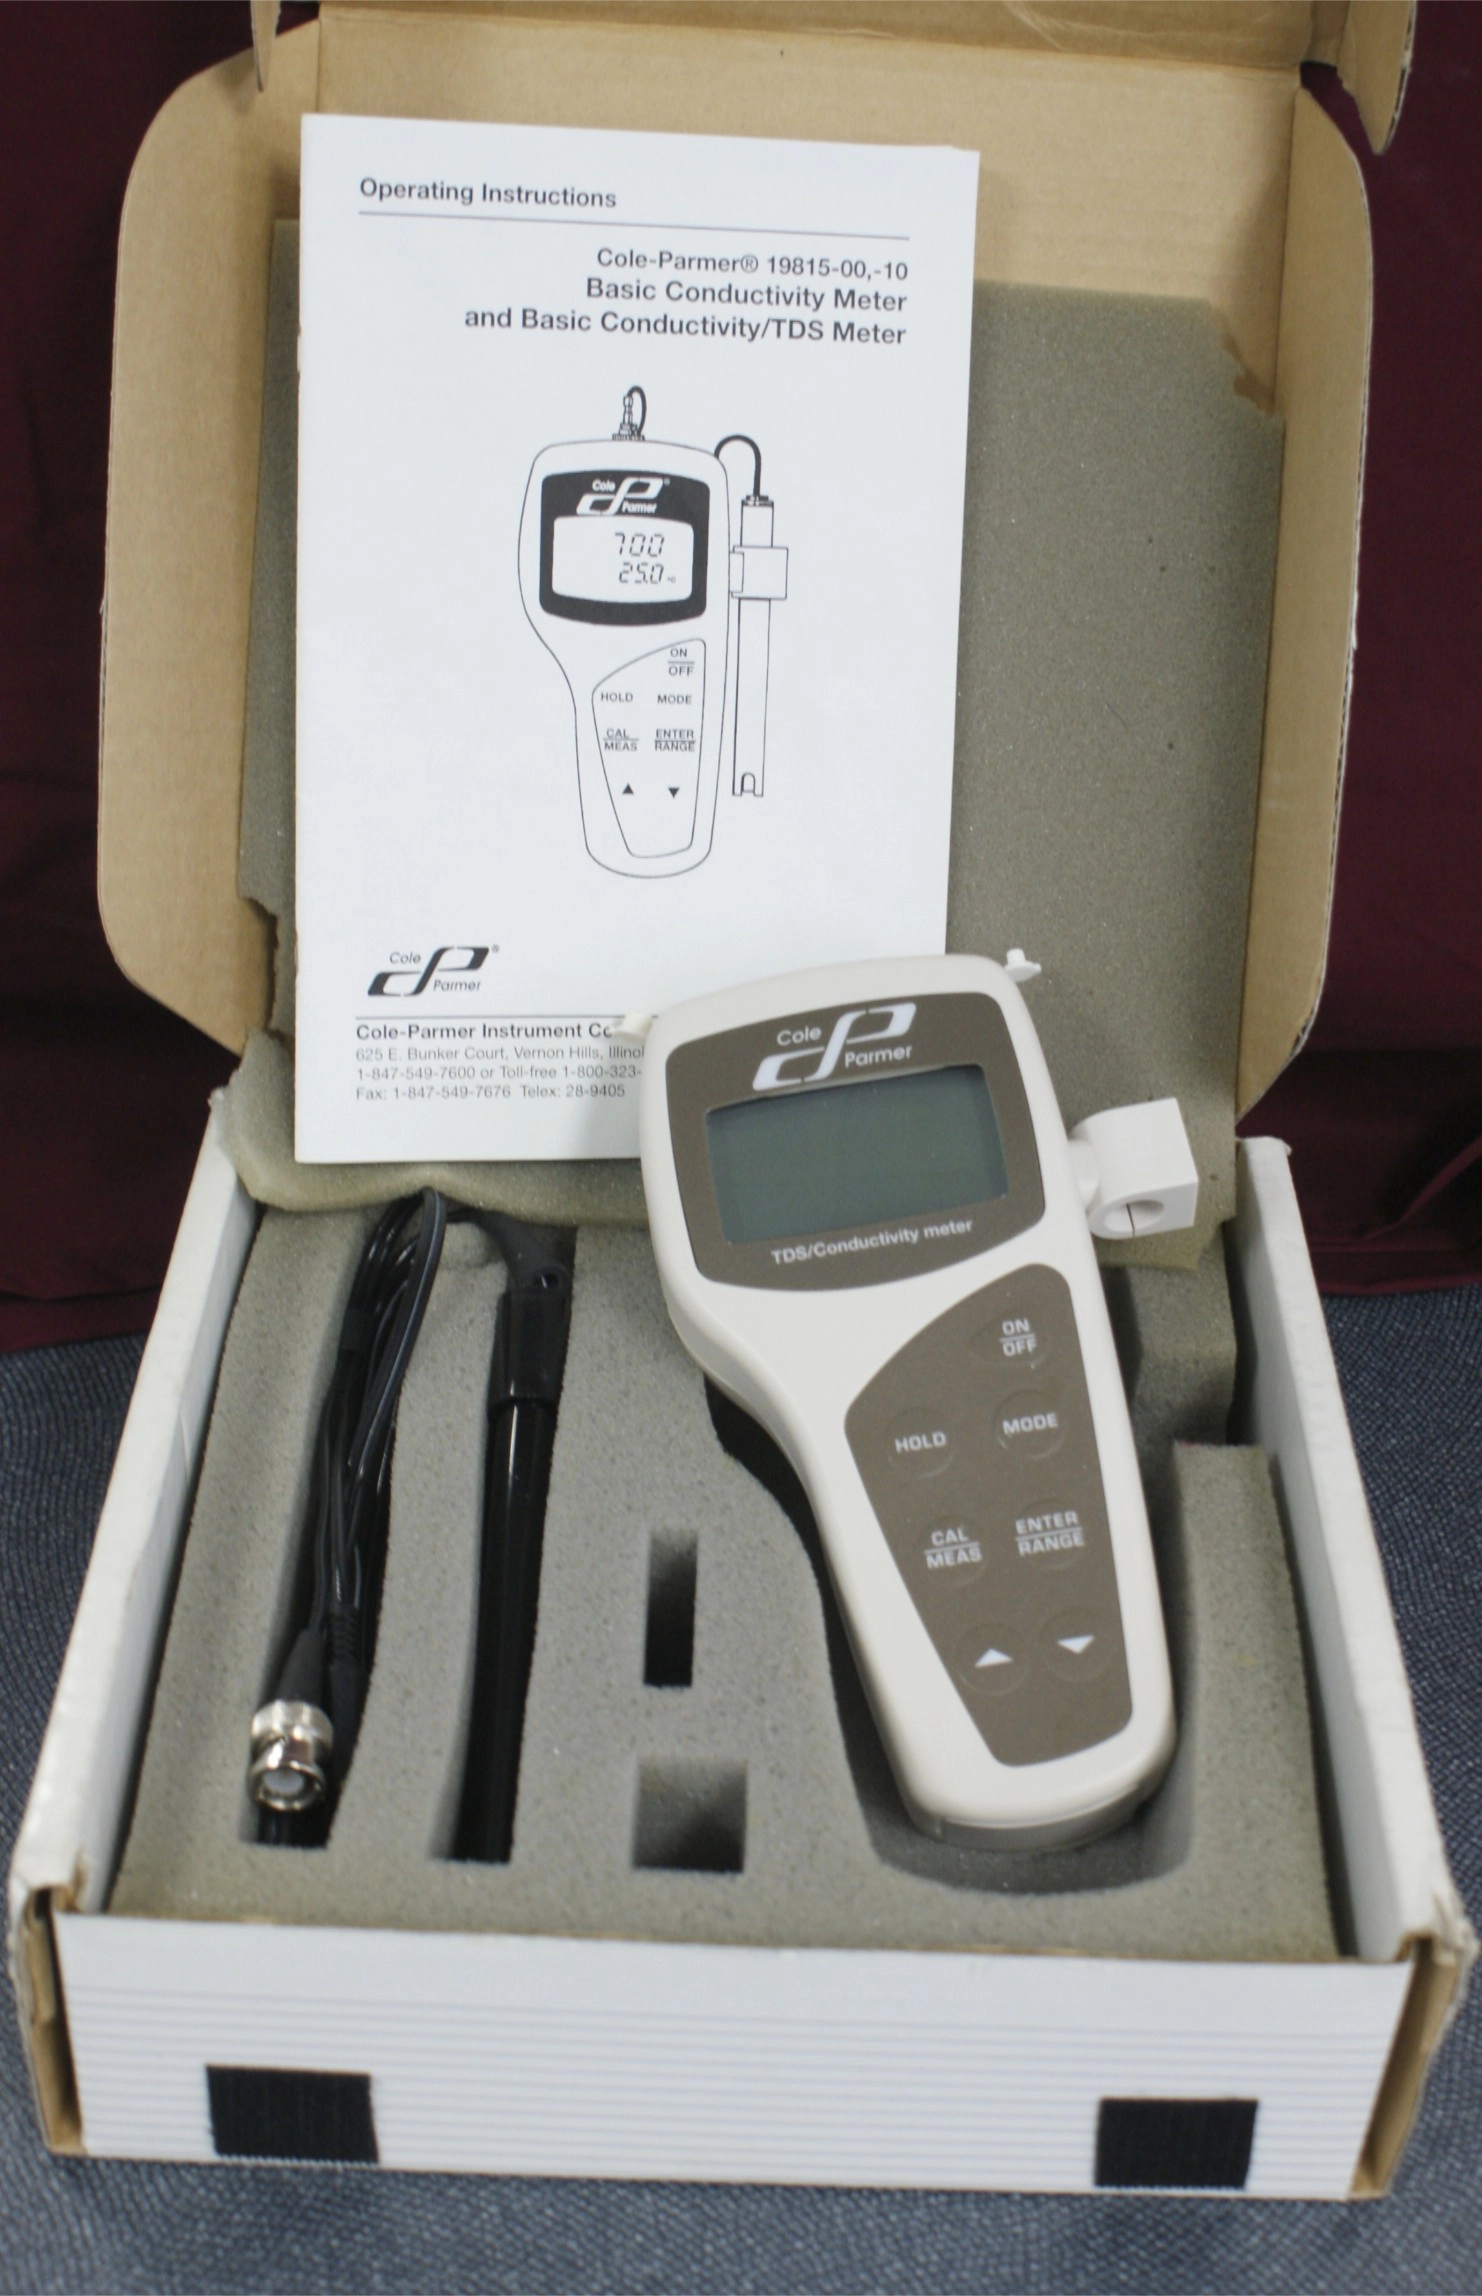 Cole-Palmer 19815 Conductivity meter Cole-Palmer 19815 TDS/Conductivity meter Portable used like new